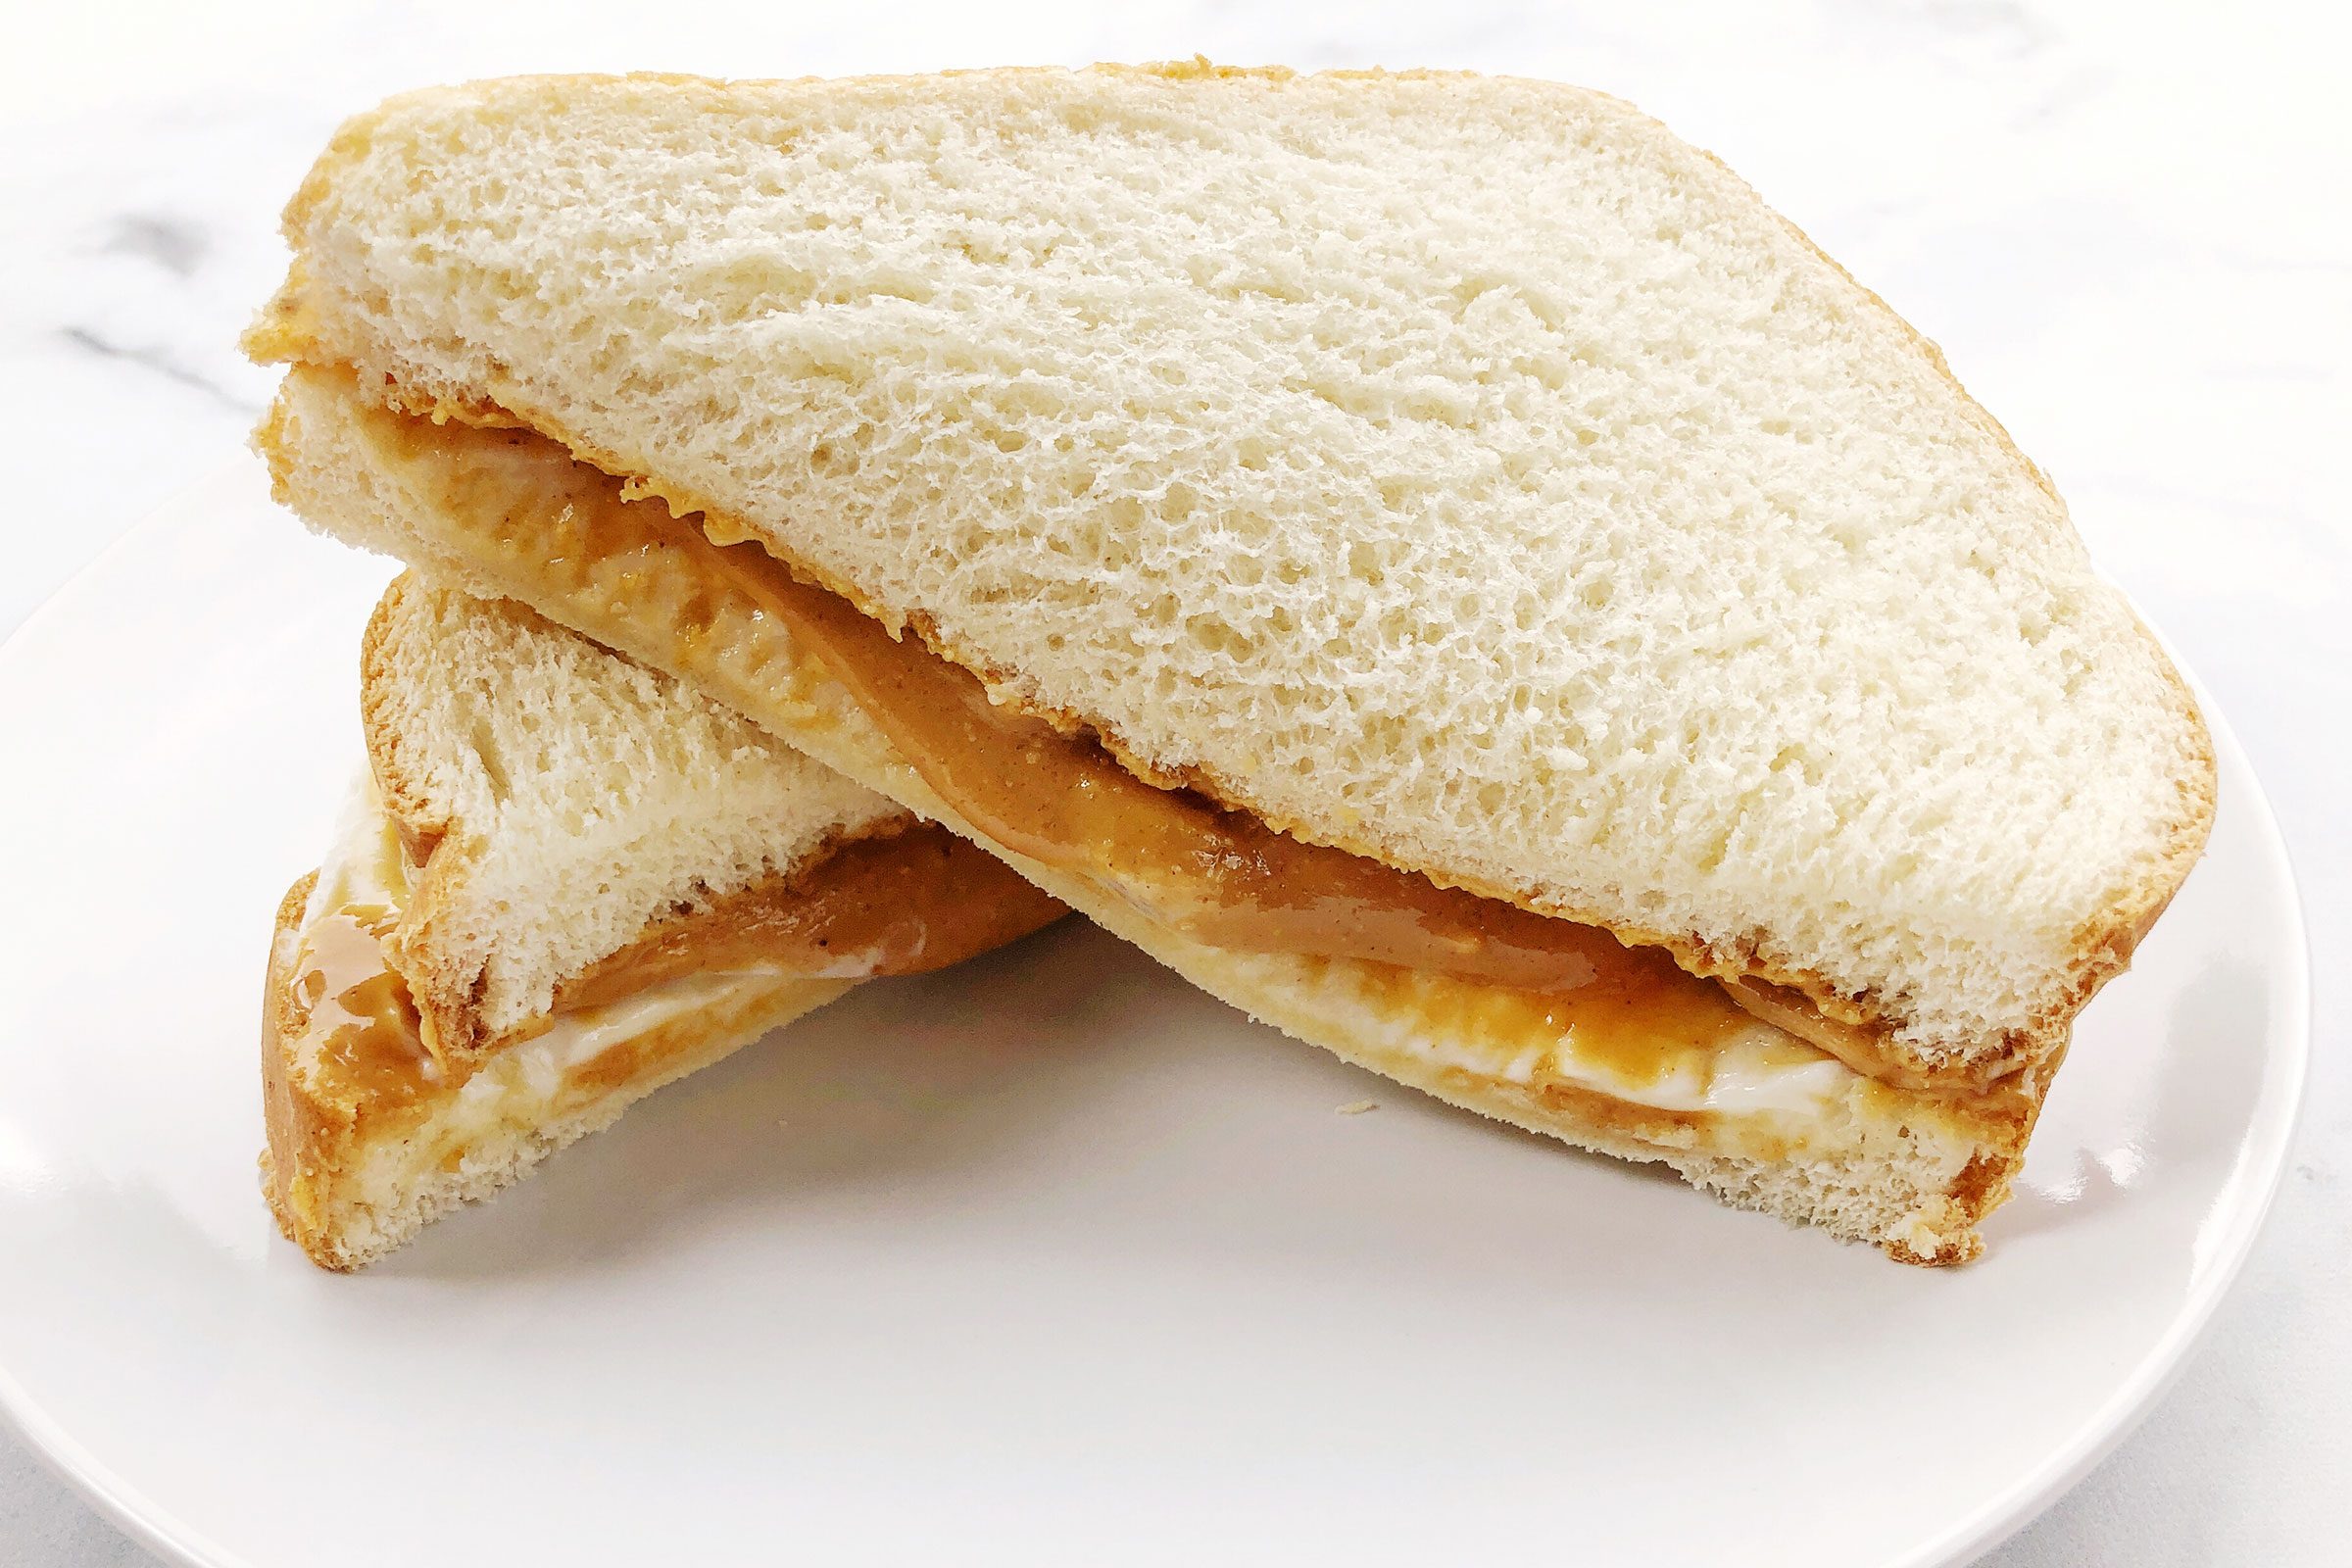 Peanut Butter And Mayo How To Make This Iconic Southern Sandwich